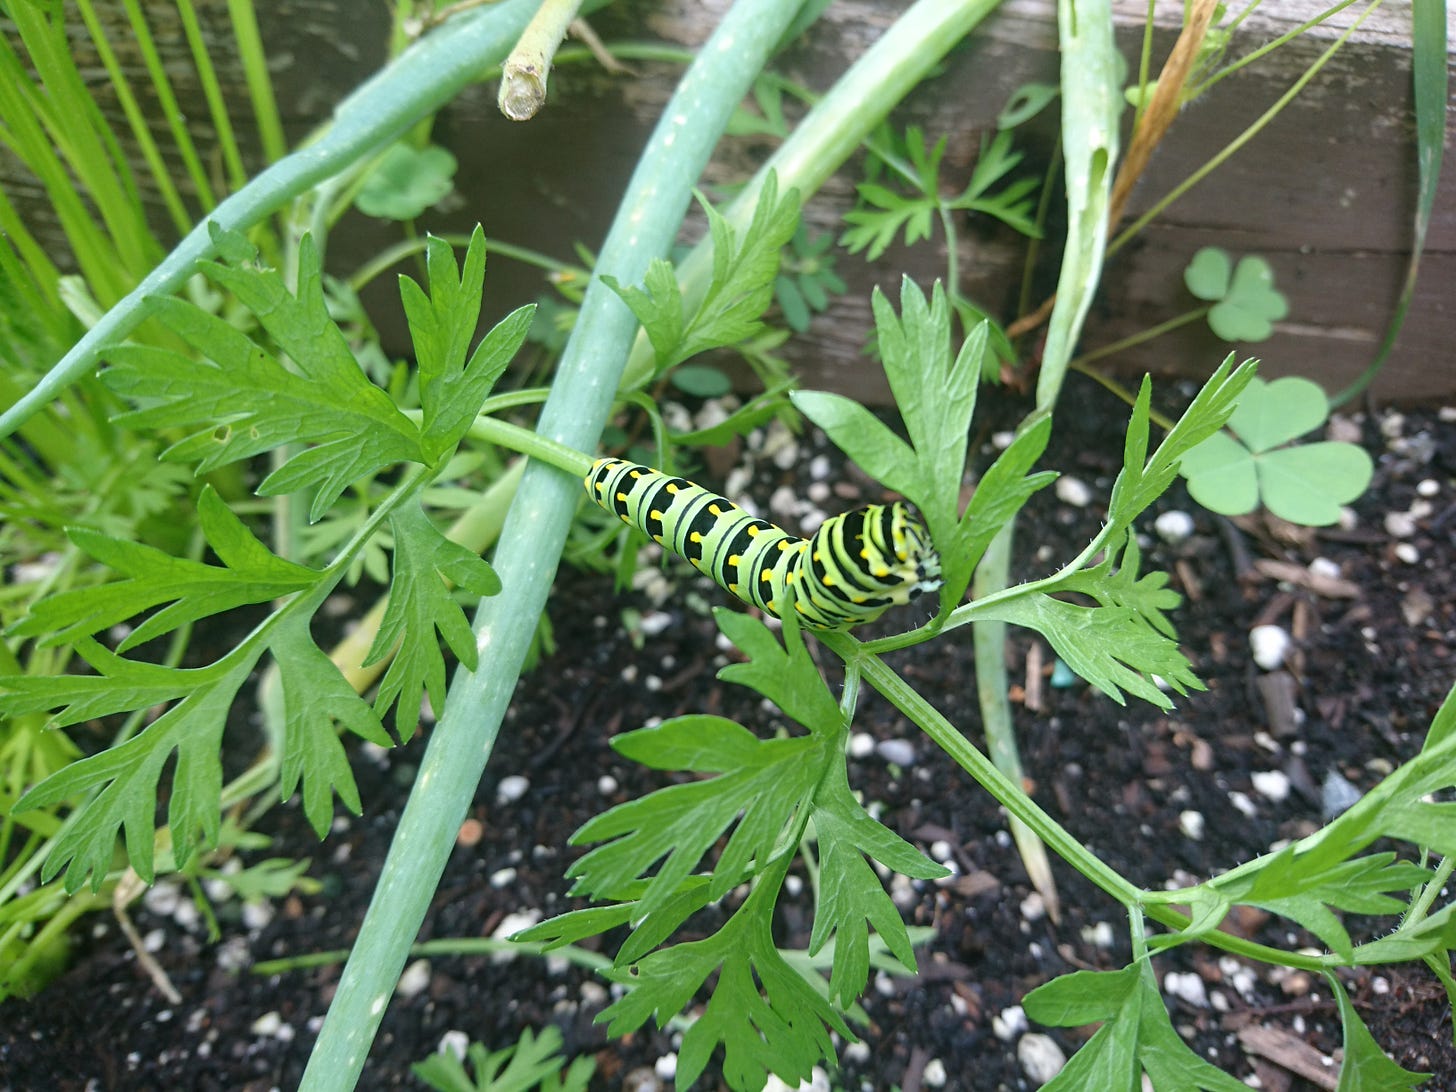 A view from above of a black swallowtail caterpillar resting on a carrot stalk as it bends down above soil and onions